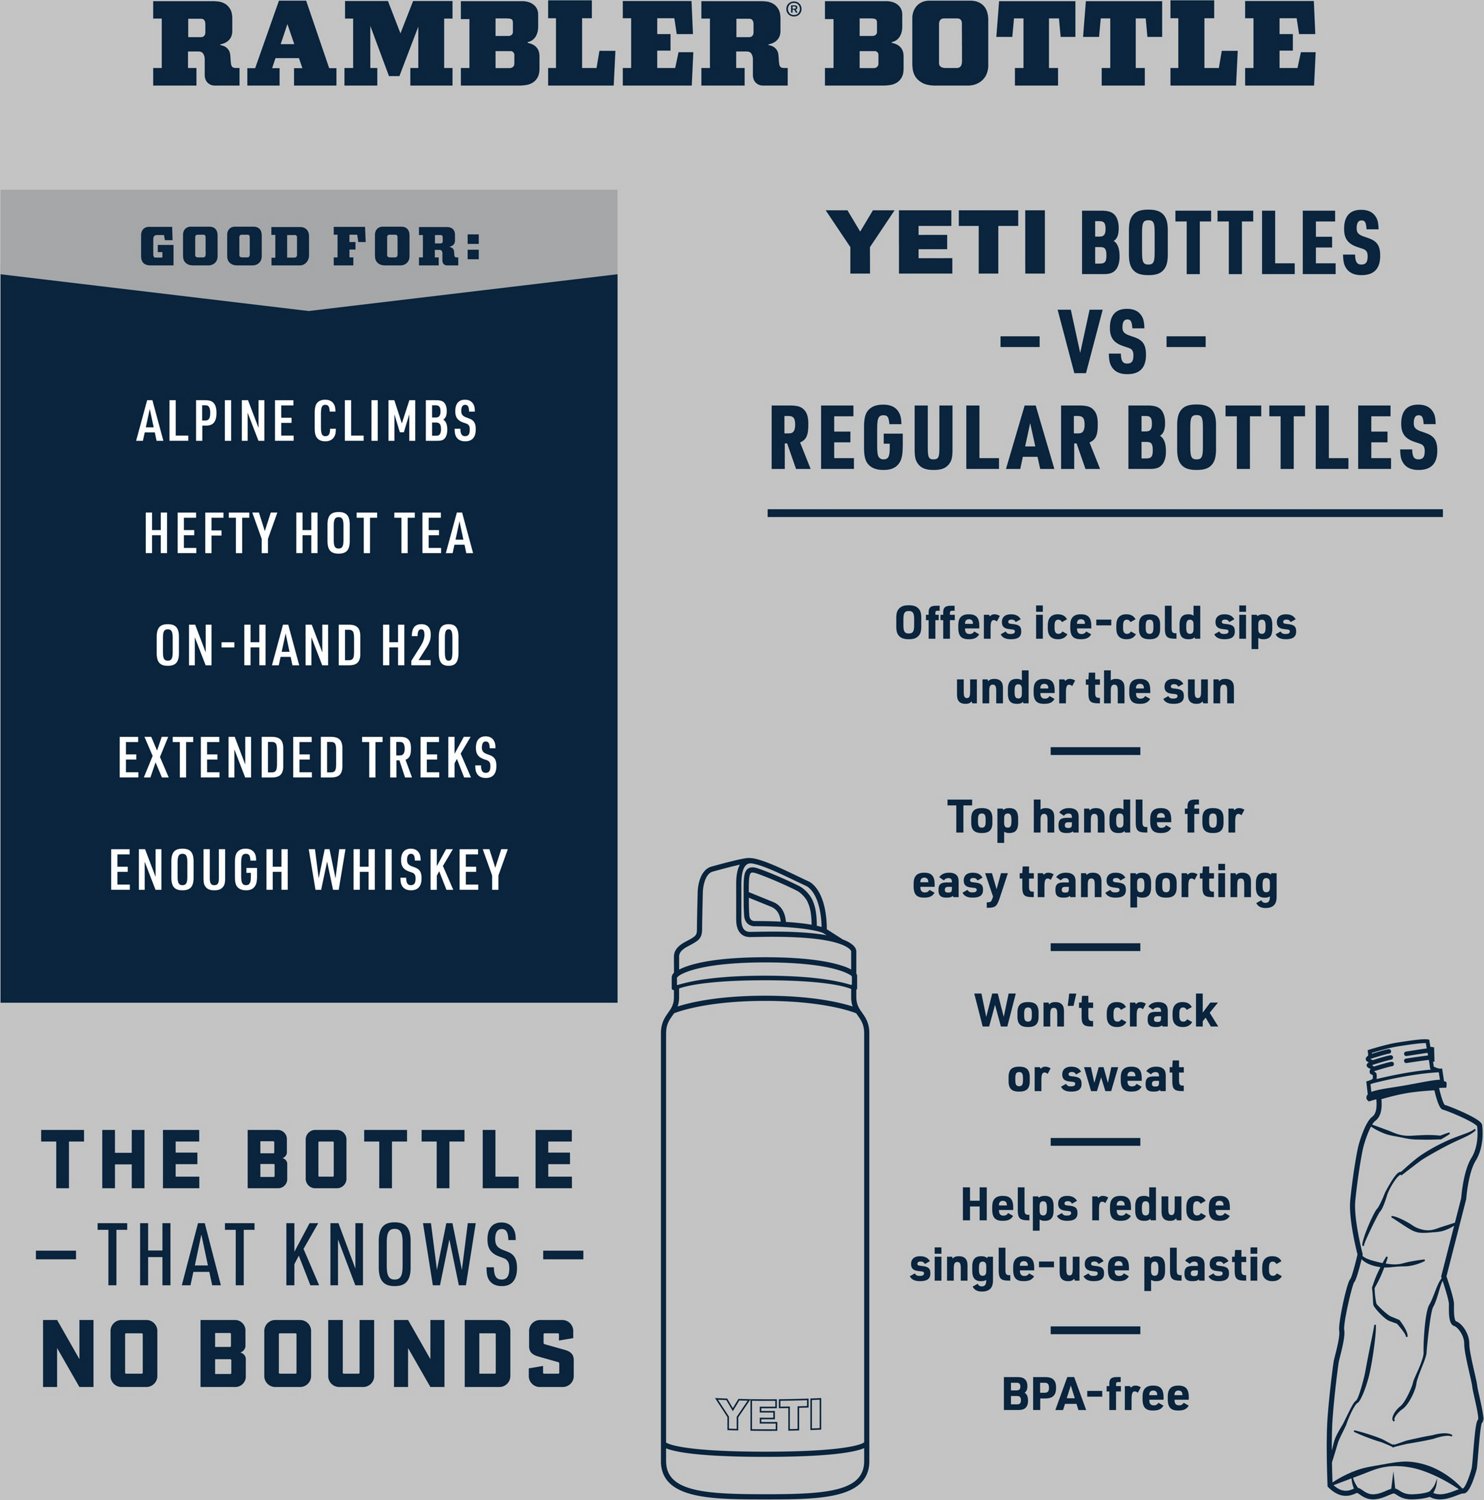 YETI Rambler 18oz Water Bottle with Chug Cap for sale online